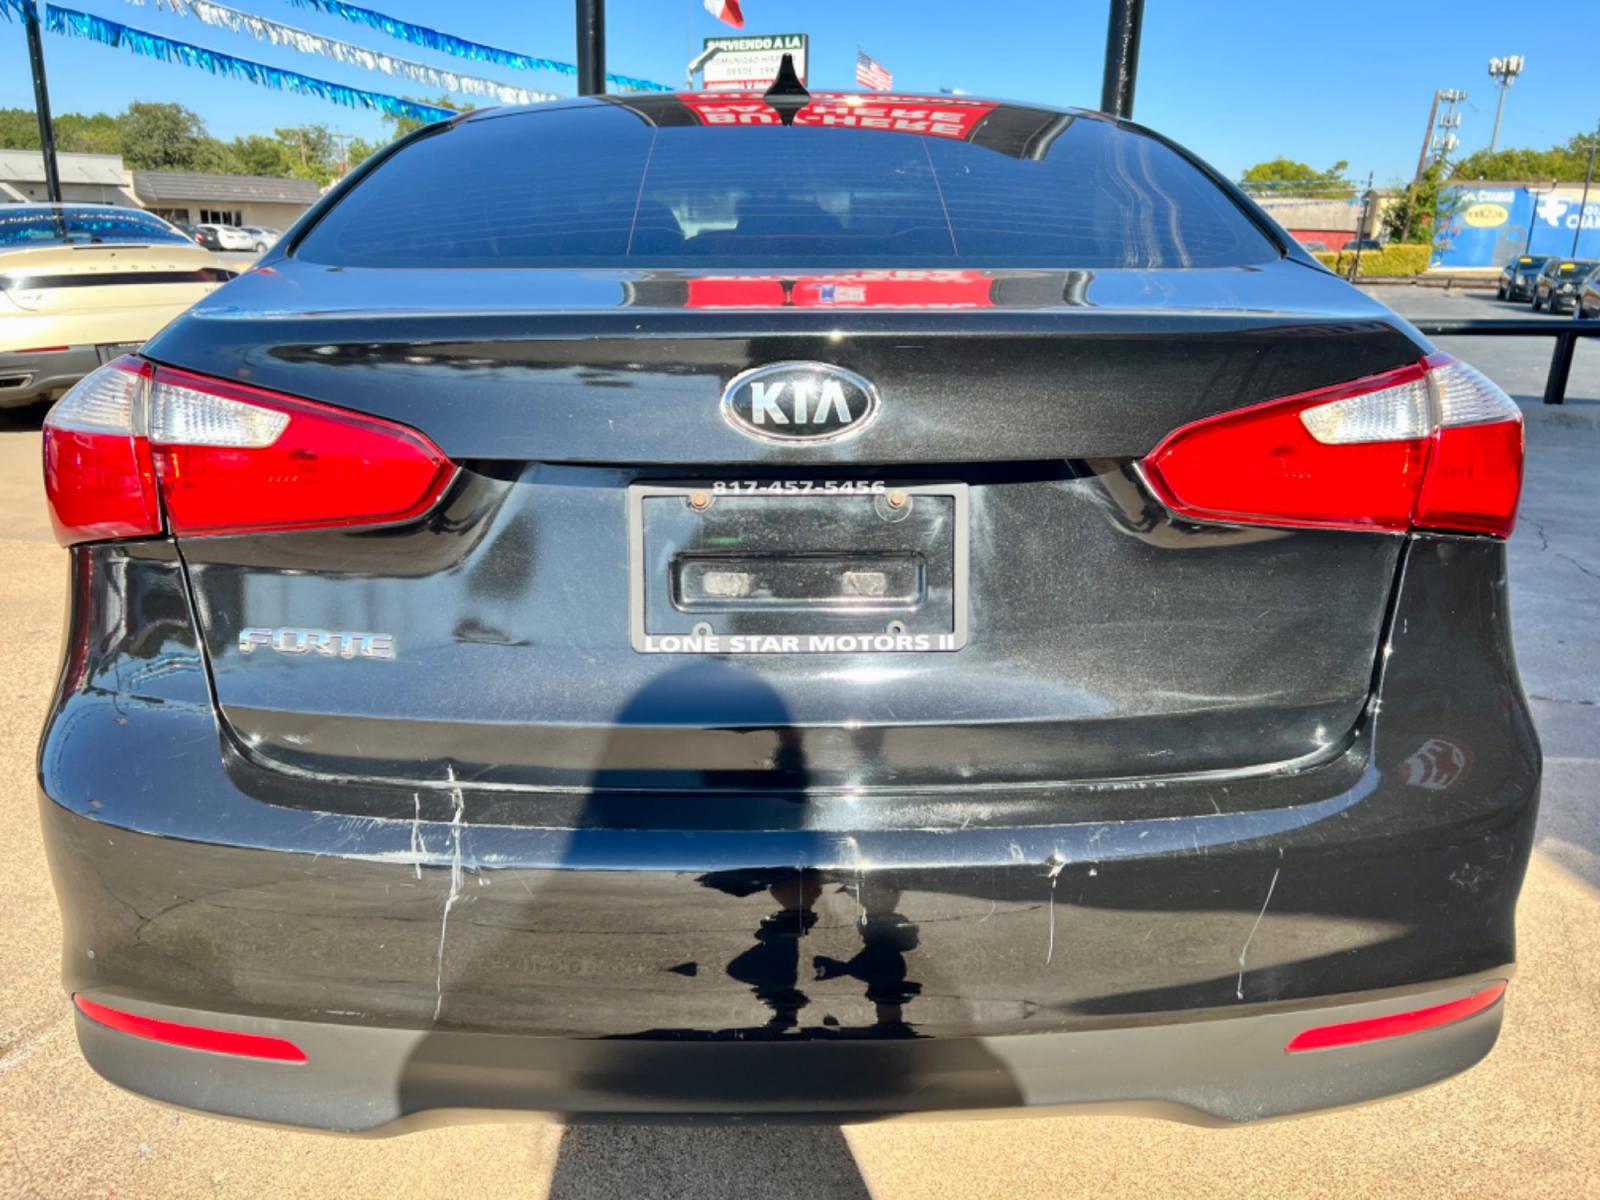 2016 BLACK KIA FORTE LX (KNAFK4A61G5) , located at 5900 E. Lancaster Ave., Fort Worth, TX, 76112, (817) 457-5456, 0.000000, 0.000000 - Cash CASH CAR ONLY, NO FINANCING AVAILABLE. THIS 2016 KIA FORTE LX 4 DOOR SEDAN RUNS AND DRIVES GREAT. IT IS EQUIPPED WITH A CD PLAYER, AM/FM RADIO AND AN AUX PORT. THE TIRES ARE IN GOOD CONDITION AND STILL HAVE TREAD LEFT ON THEM. THIS CAR WILL NOT LAST SO ACT FAST! Call or text Frances a - Photo #5